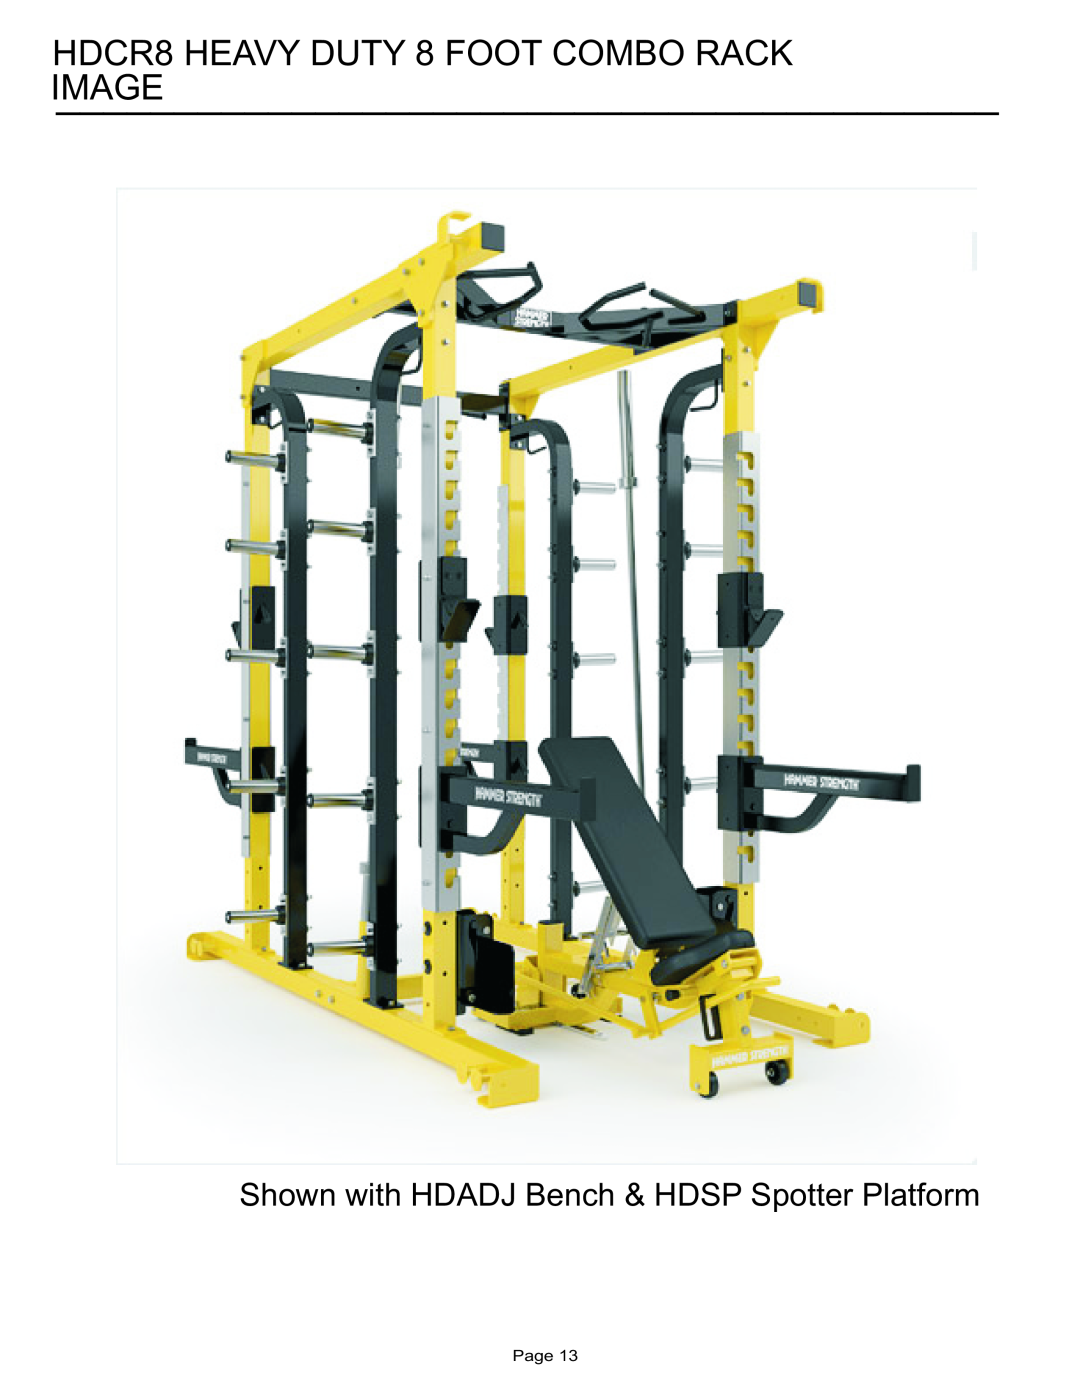 Life Fitness manual HDCR8 HEAVY DUTY 8 FOOT COMBO RACK IMAGE, Shown with HDADJ Bench & HDSP Spotter Platform, Page 